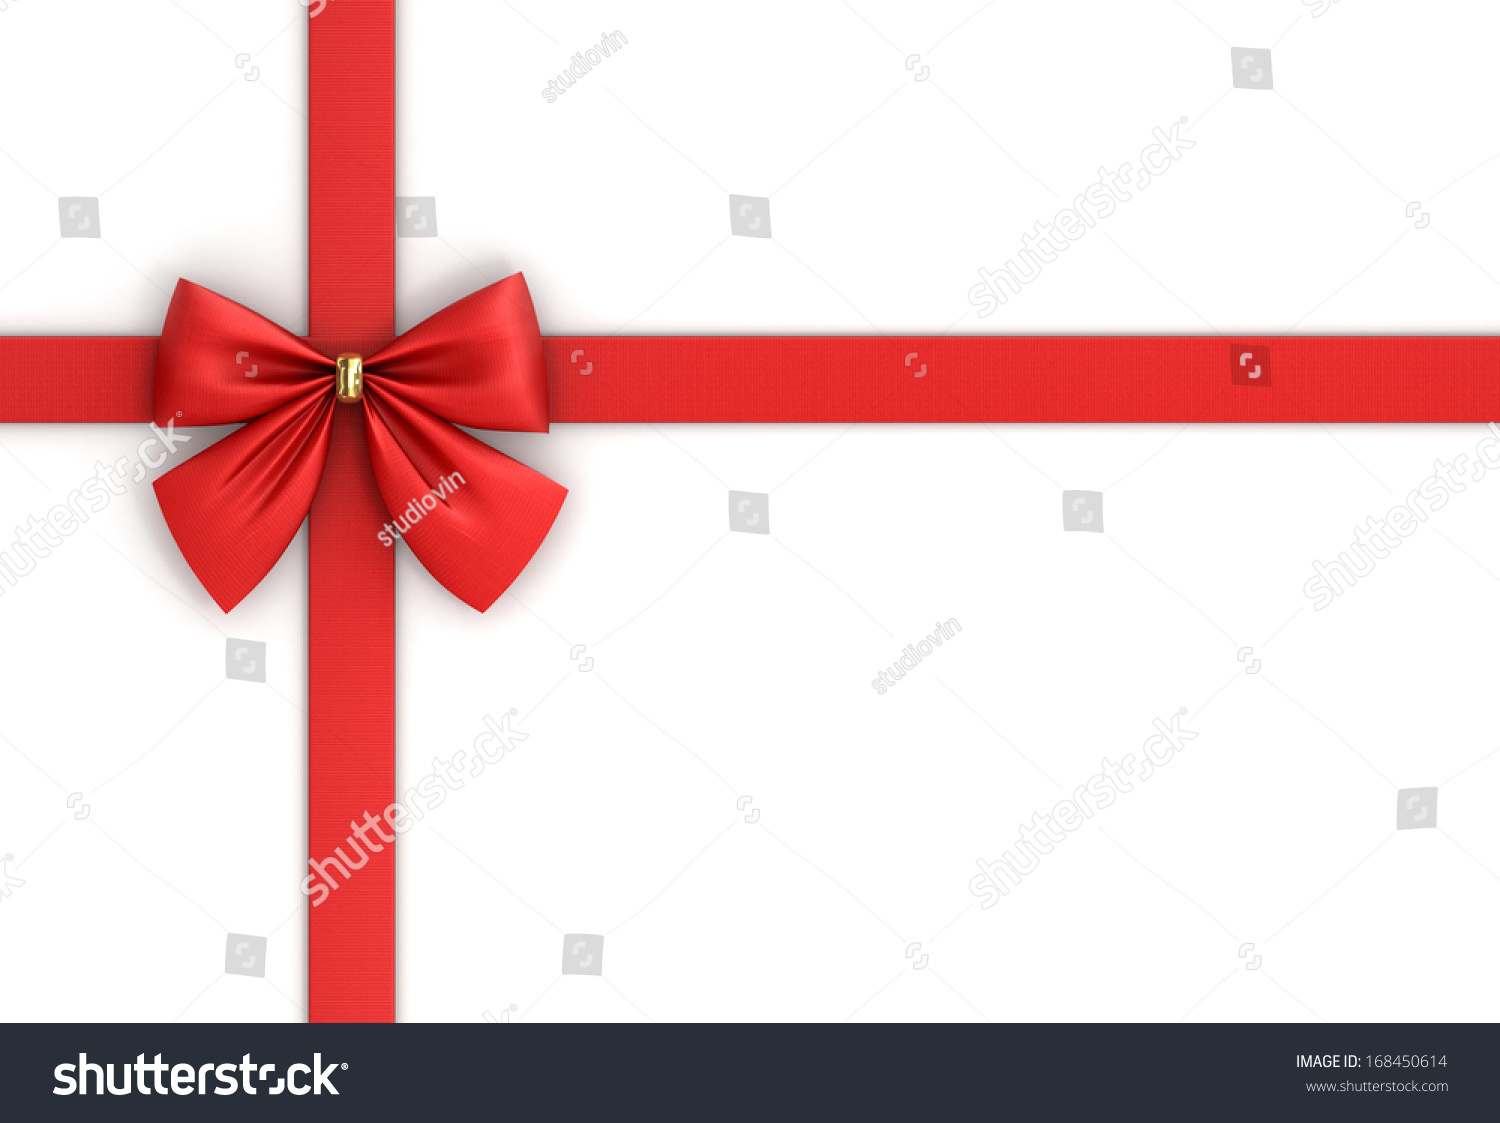 Red Ribbon With Bow With Tails Isolated On White Background Stock Photo ...